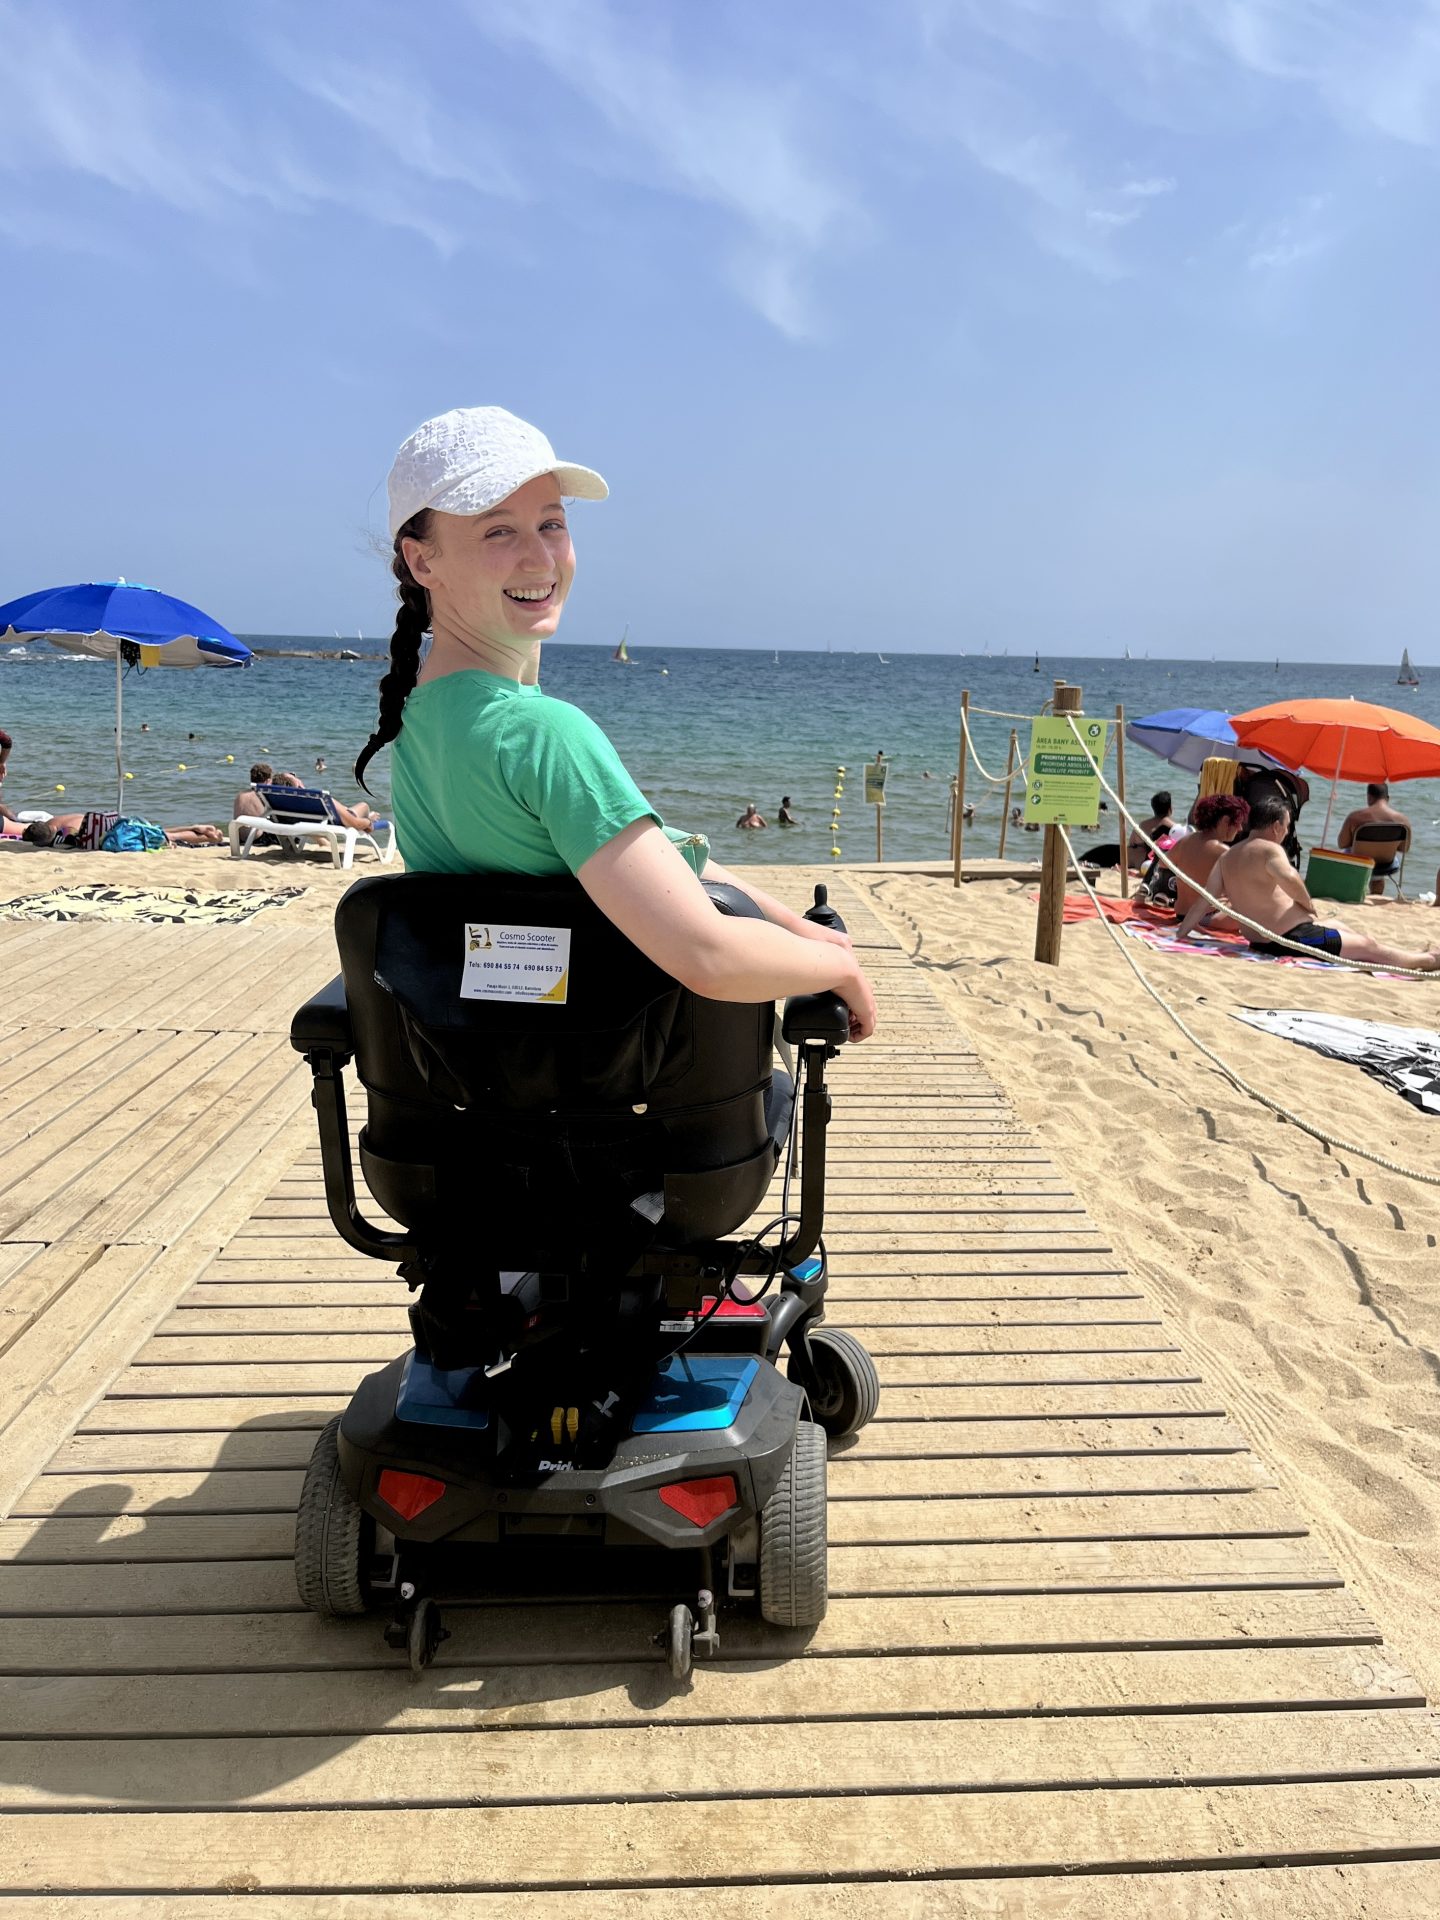 Pippa in her wheelchair on a wooden walkway at Nova Icaria Beach, turning back to look at the camera with the sea visible behind her. A highlight of wheelchair accessible Barcelona.